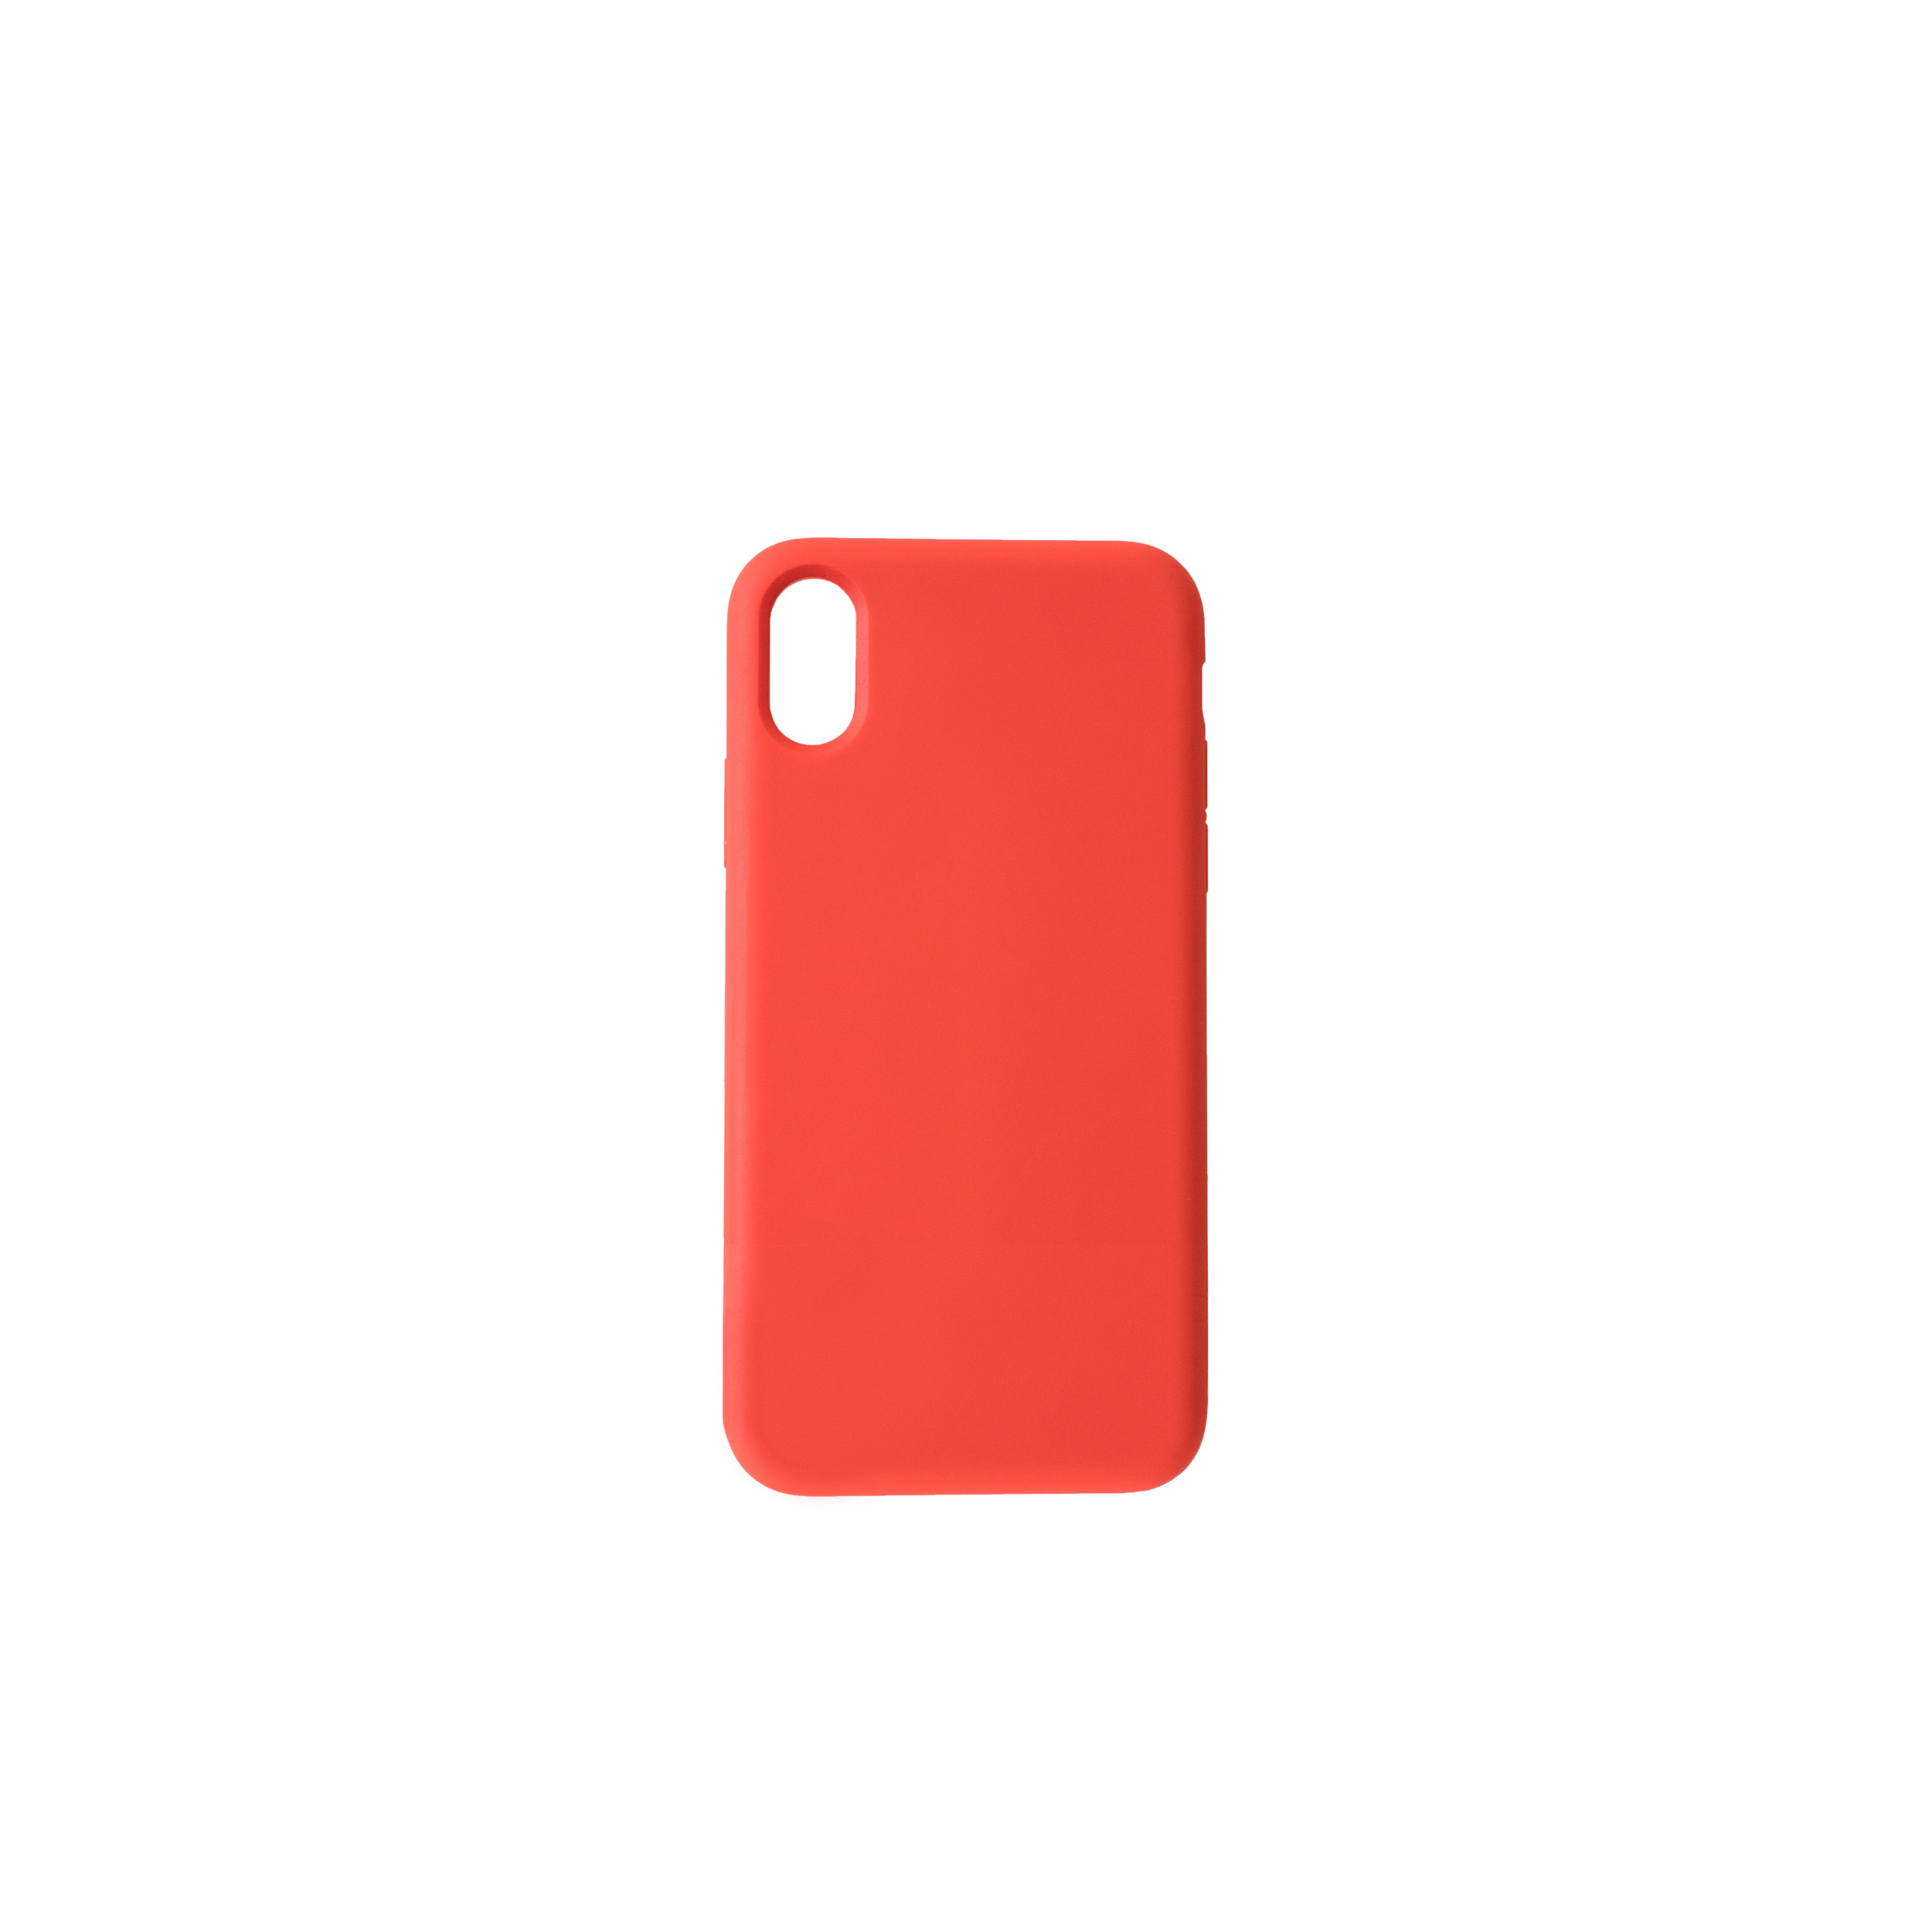 KMP für Schutzhülle XS red Max Silikon Max, Red, iPhone Cover, XS iPhone Apple, Full